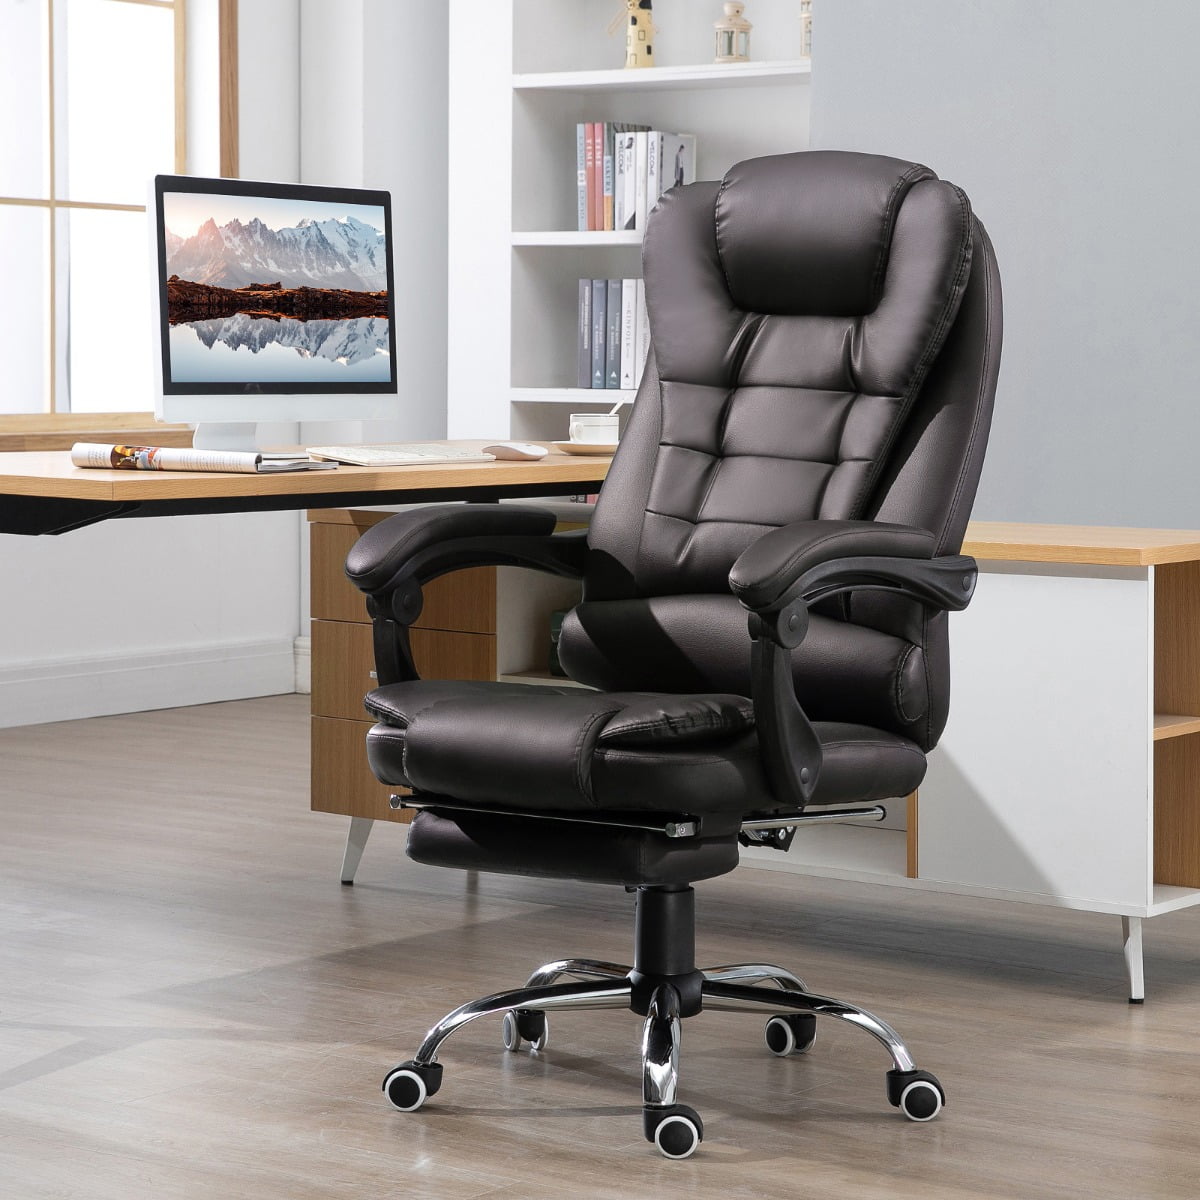 PU Leather Ergonomic Midback Executive Computer Best Desk Task Office Chair NEW 